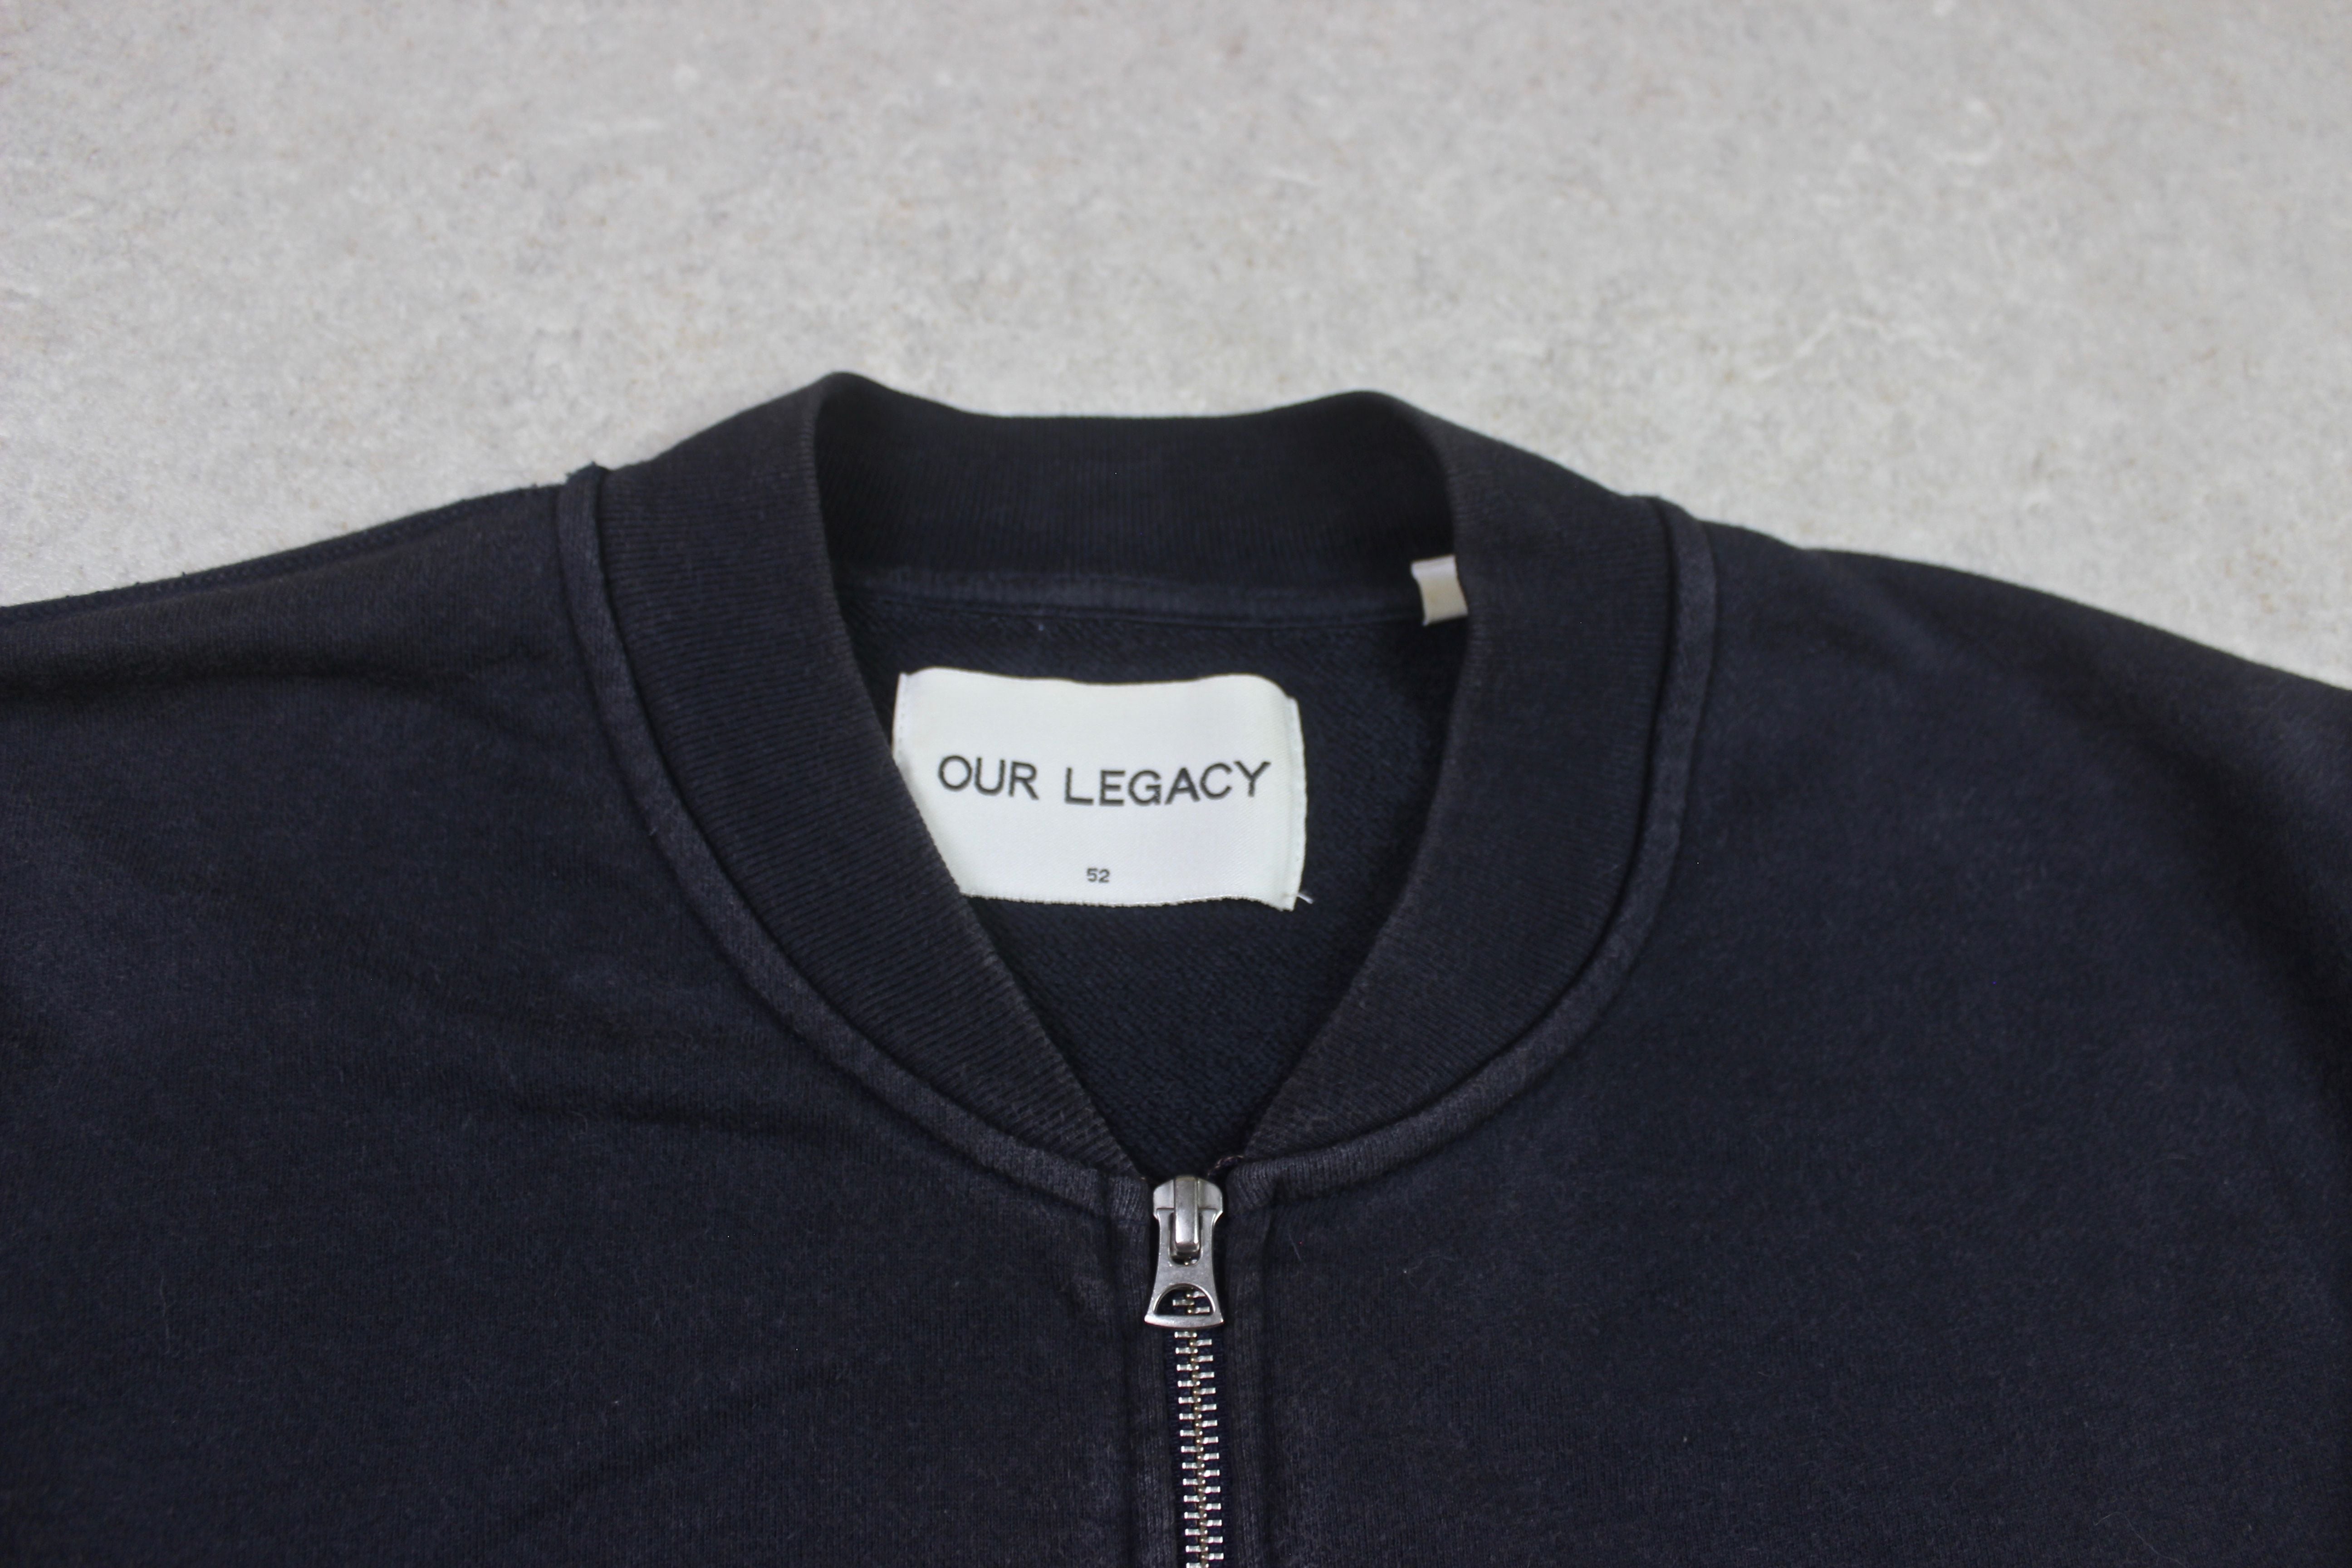 Our Legacy - Jersey Bomber Jacket - Navy Blue - 52/Extra Large